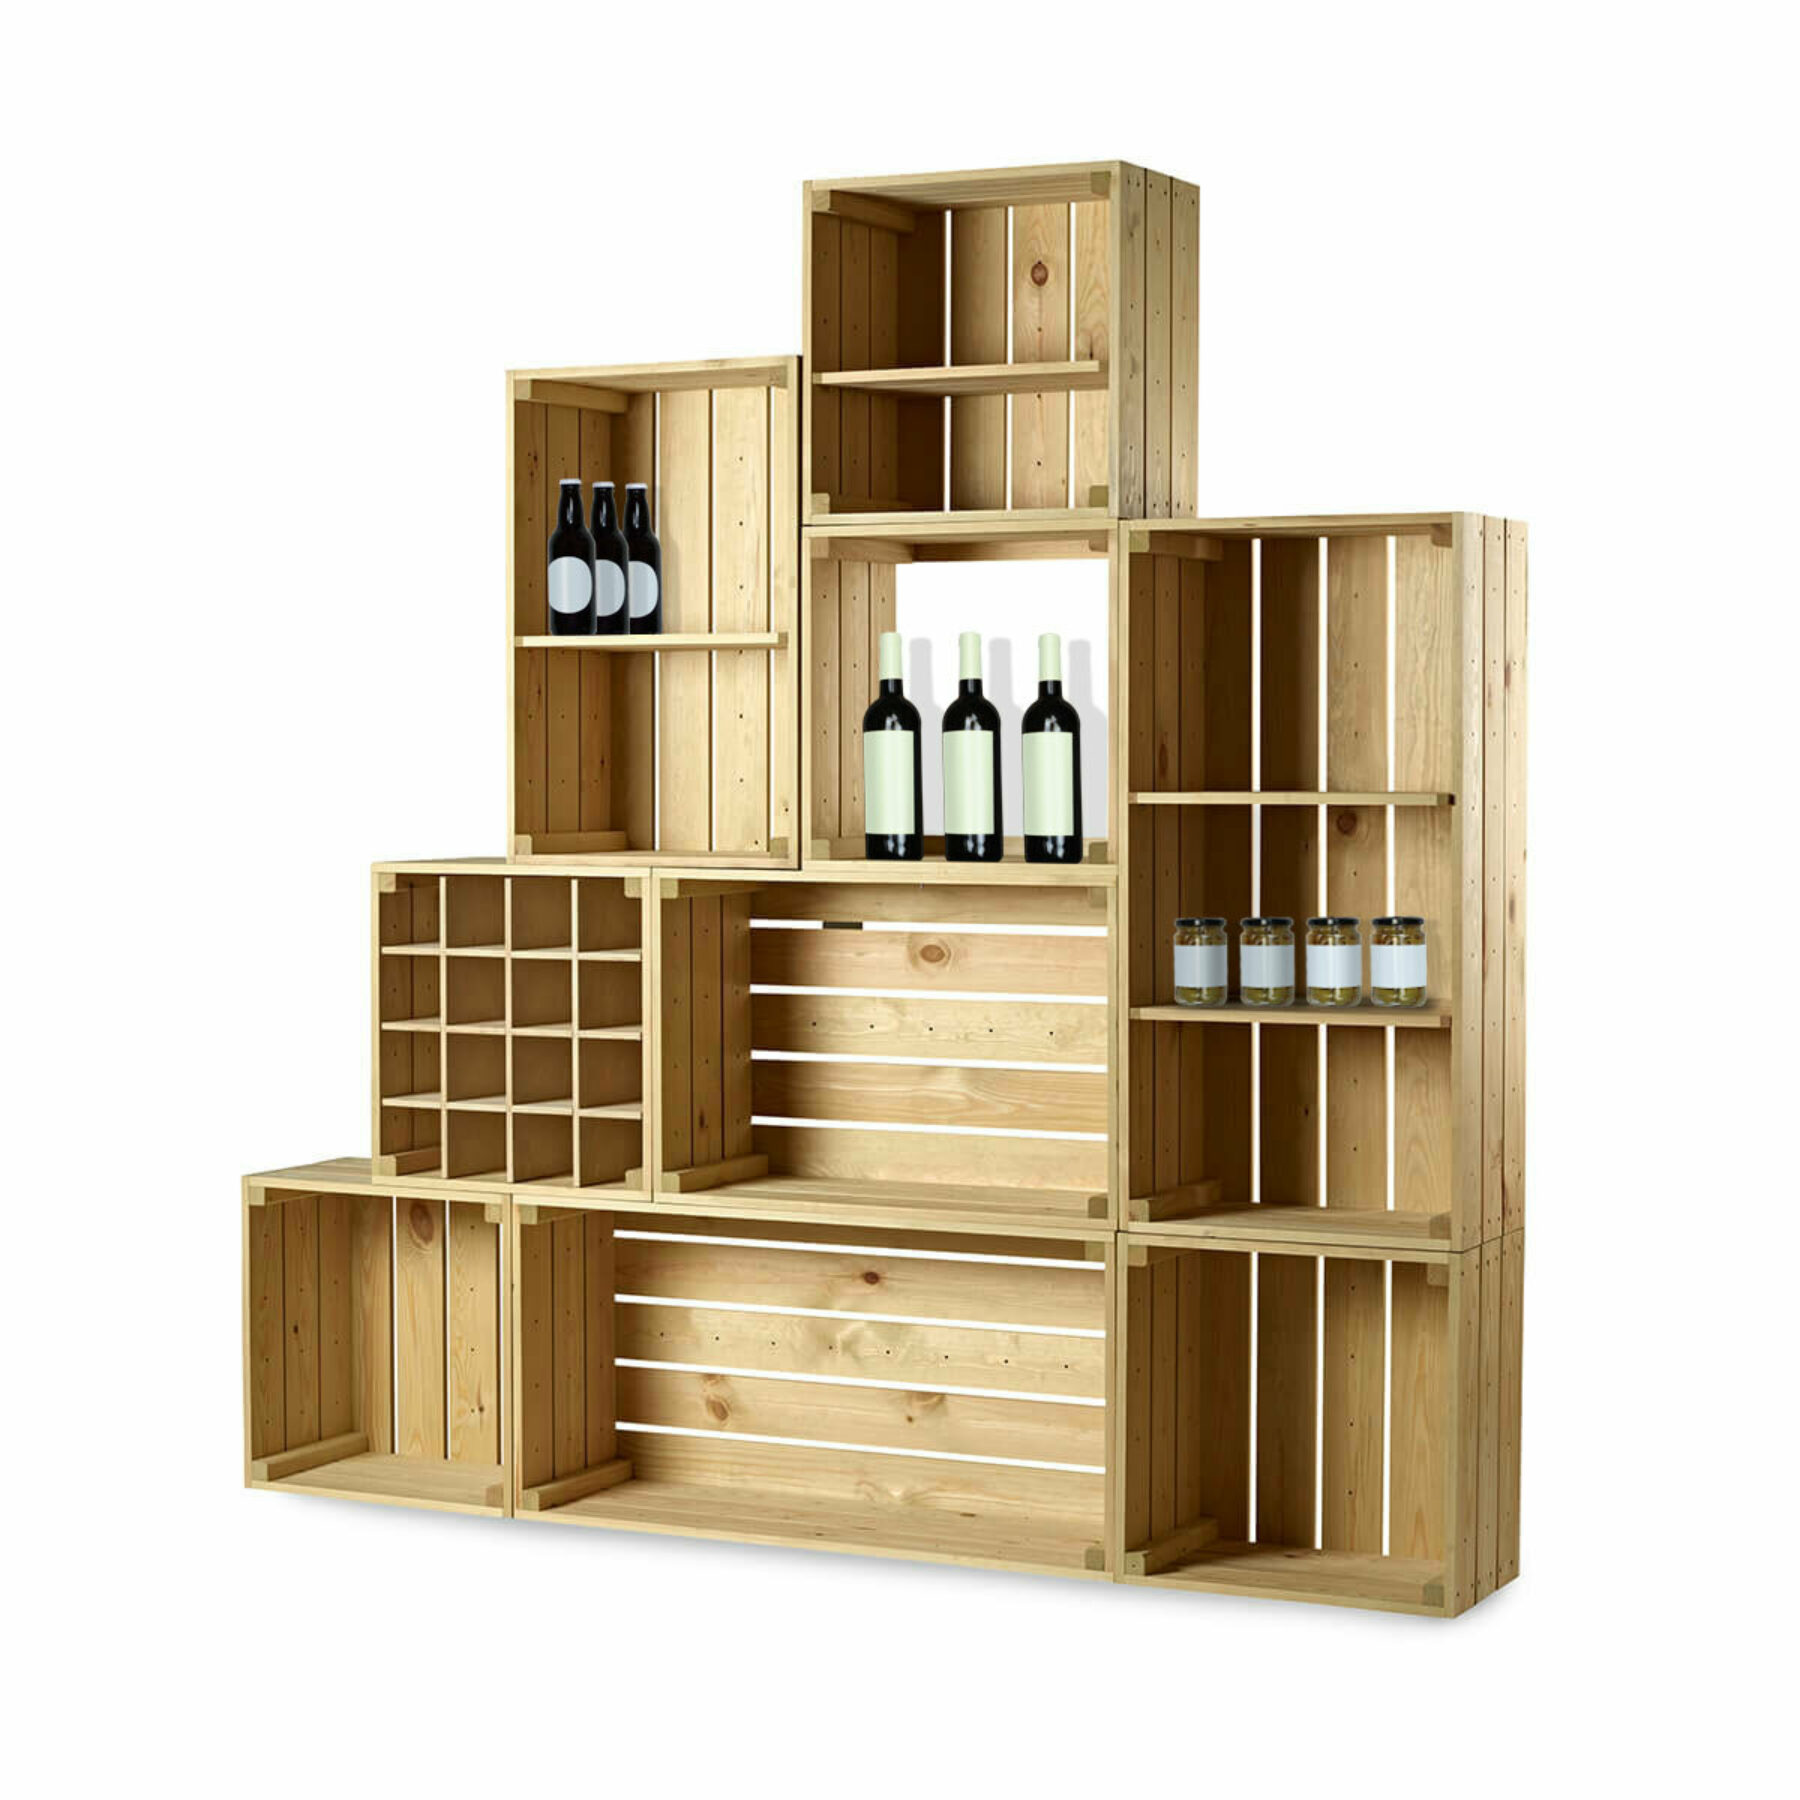 Large CrateWall Wine Feature